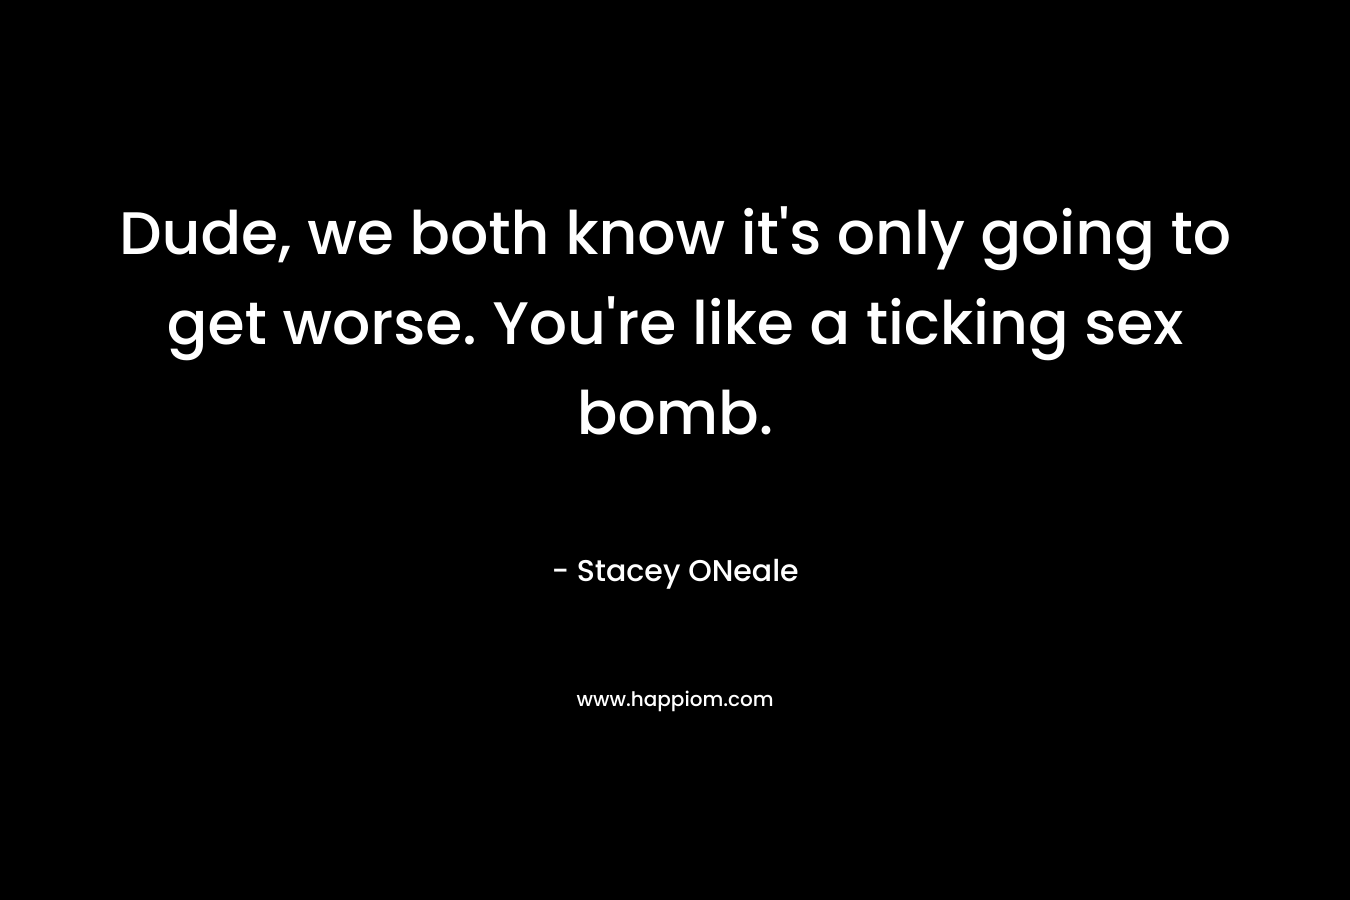 Dude, we both know it’s only going to get worse. You’re like a ticking sex bomb. – Stacey ONeale